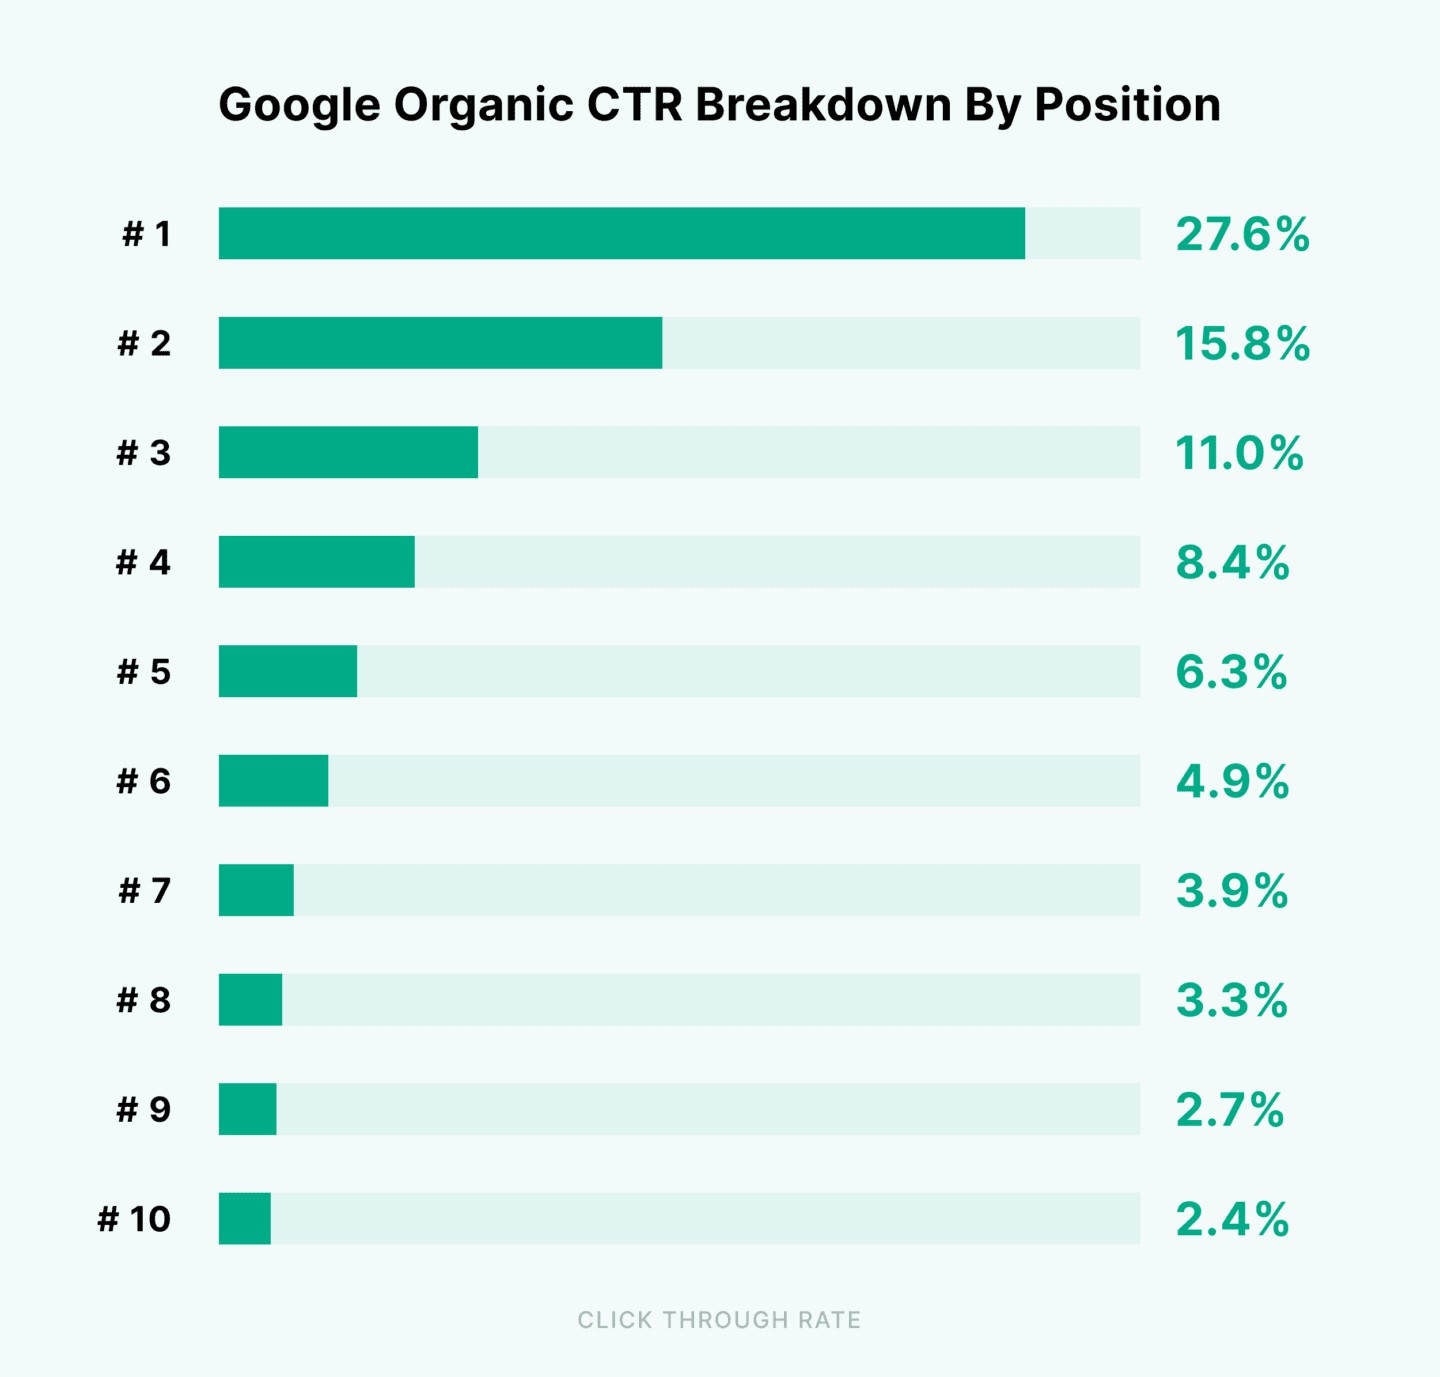 A screenshot of the Google Organic CTR Breakdown By Position